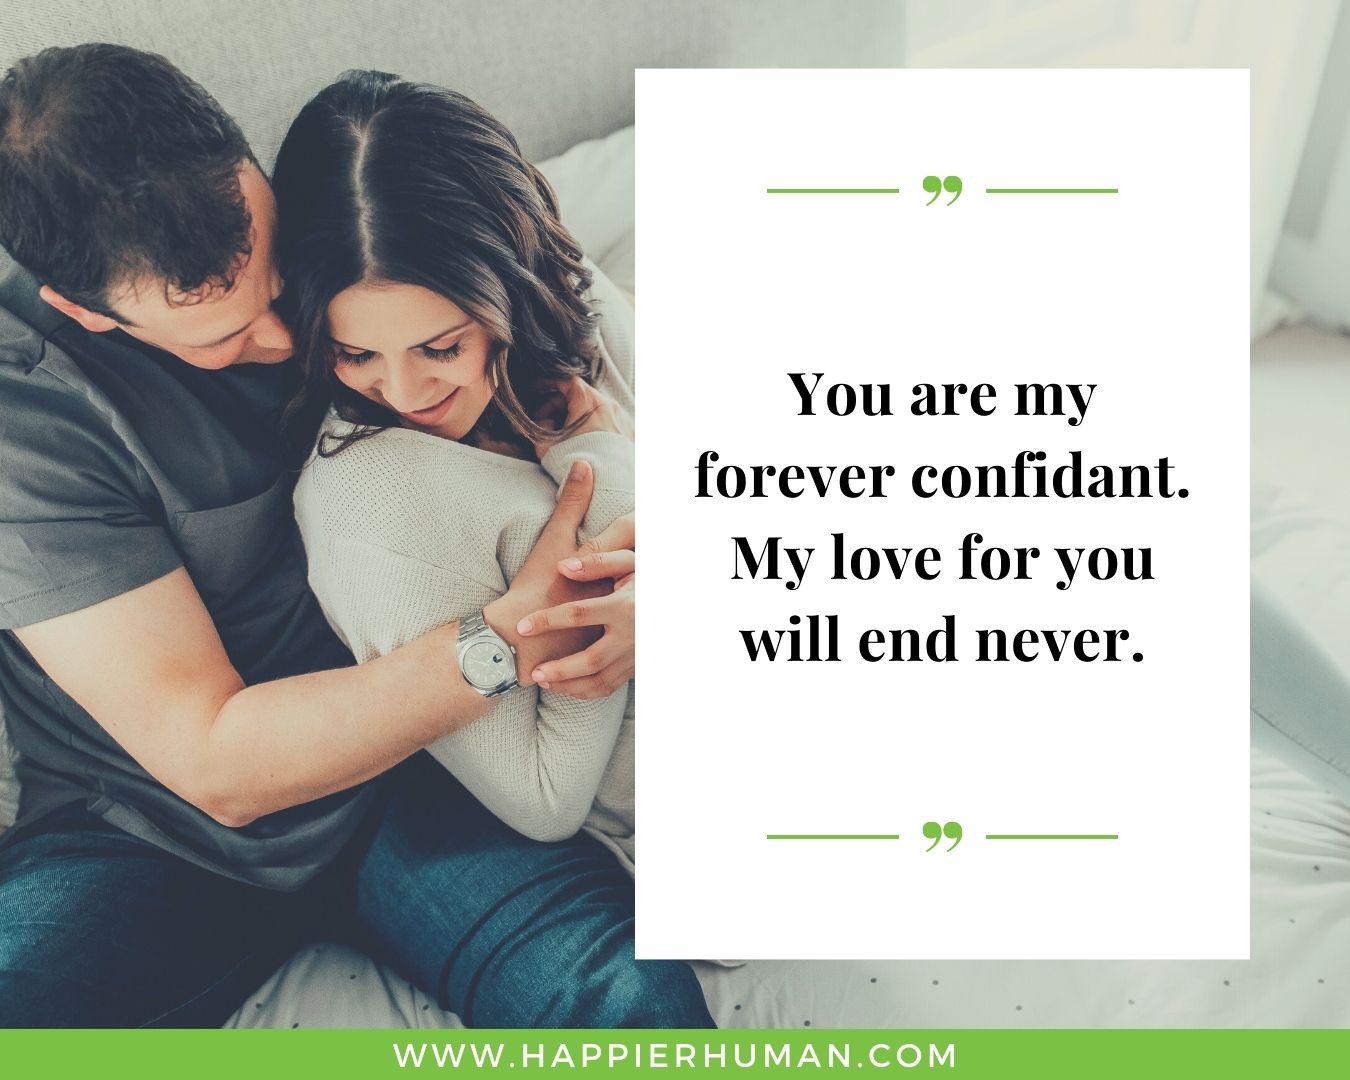 Messages of Love for her - “You are my forever confidant. My love for you will end never.”